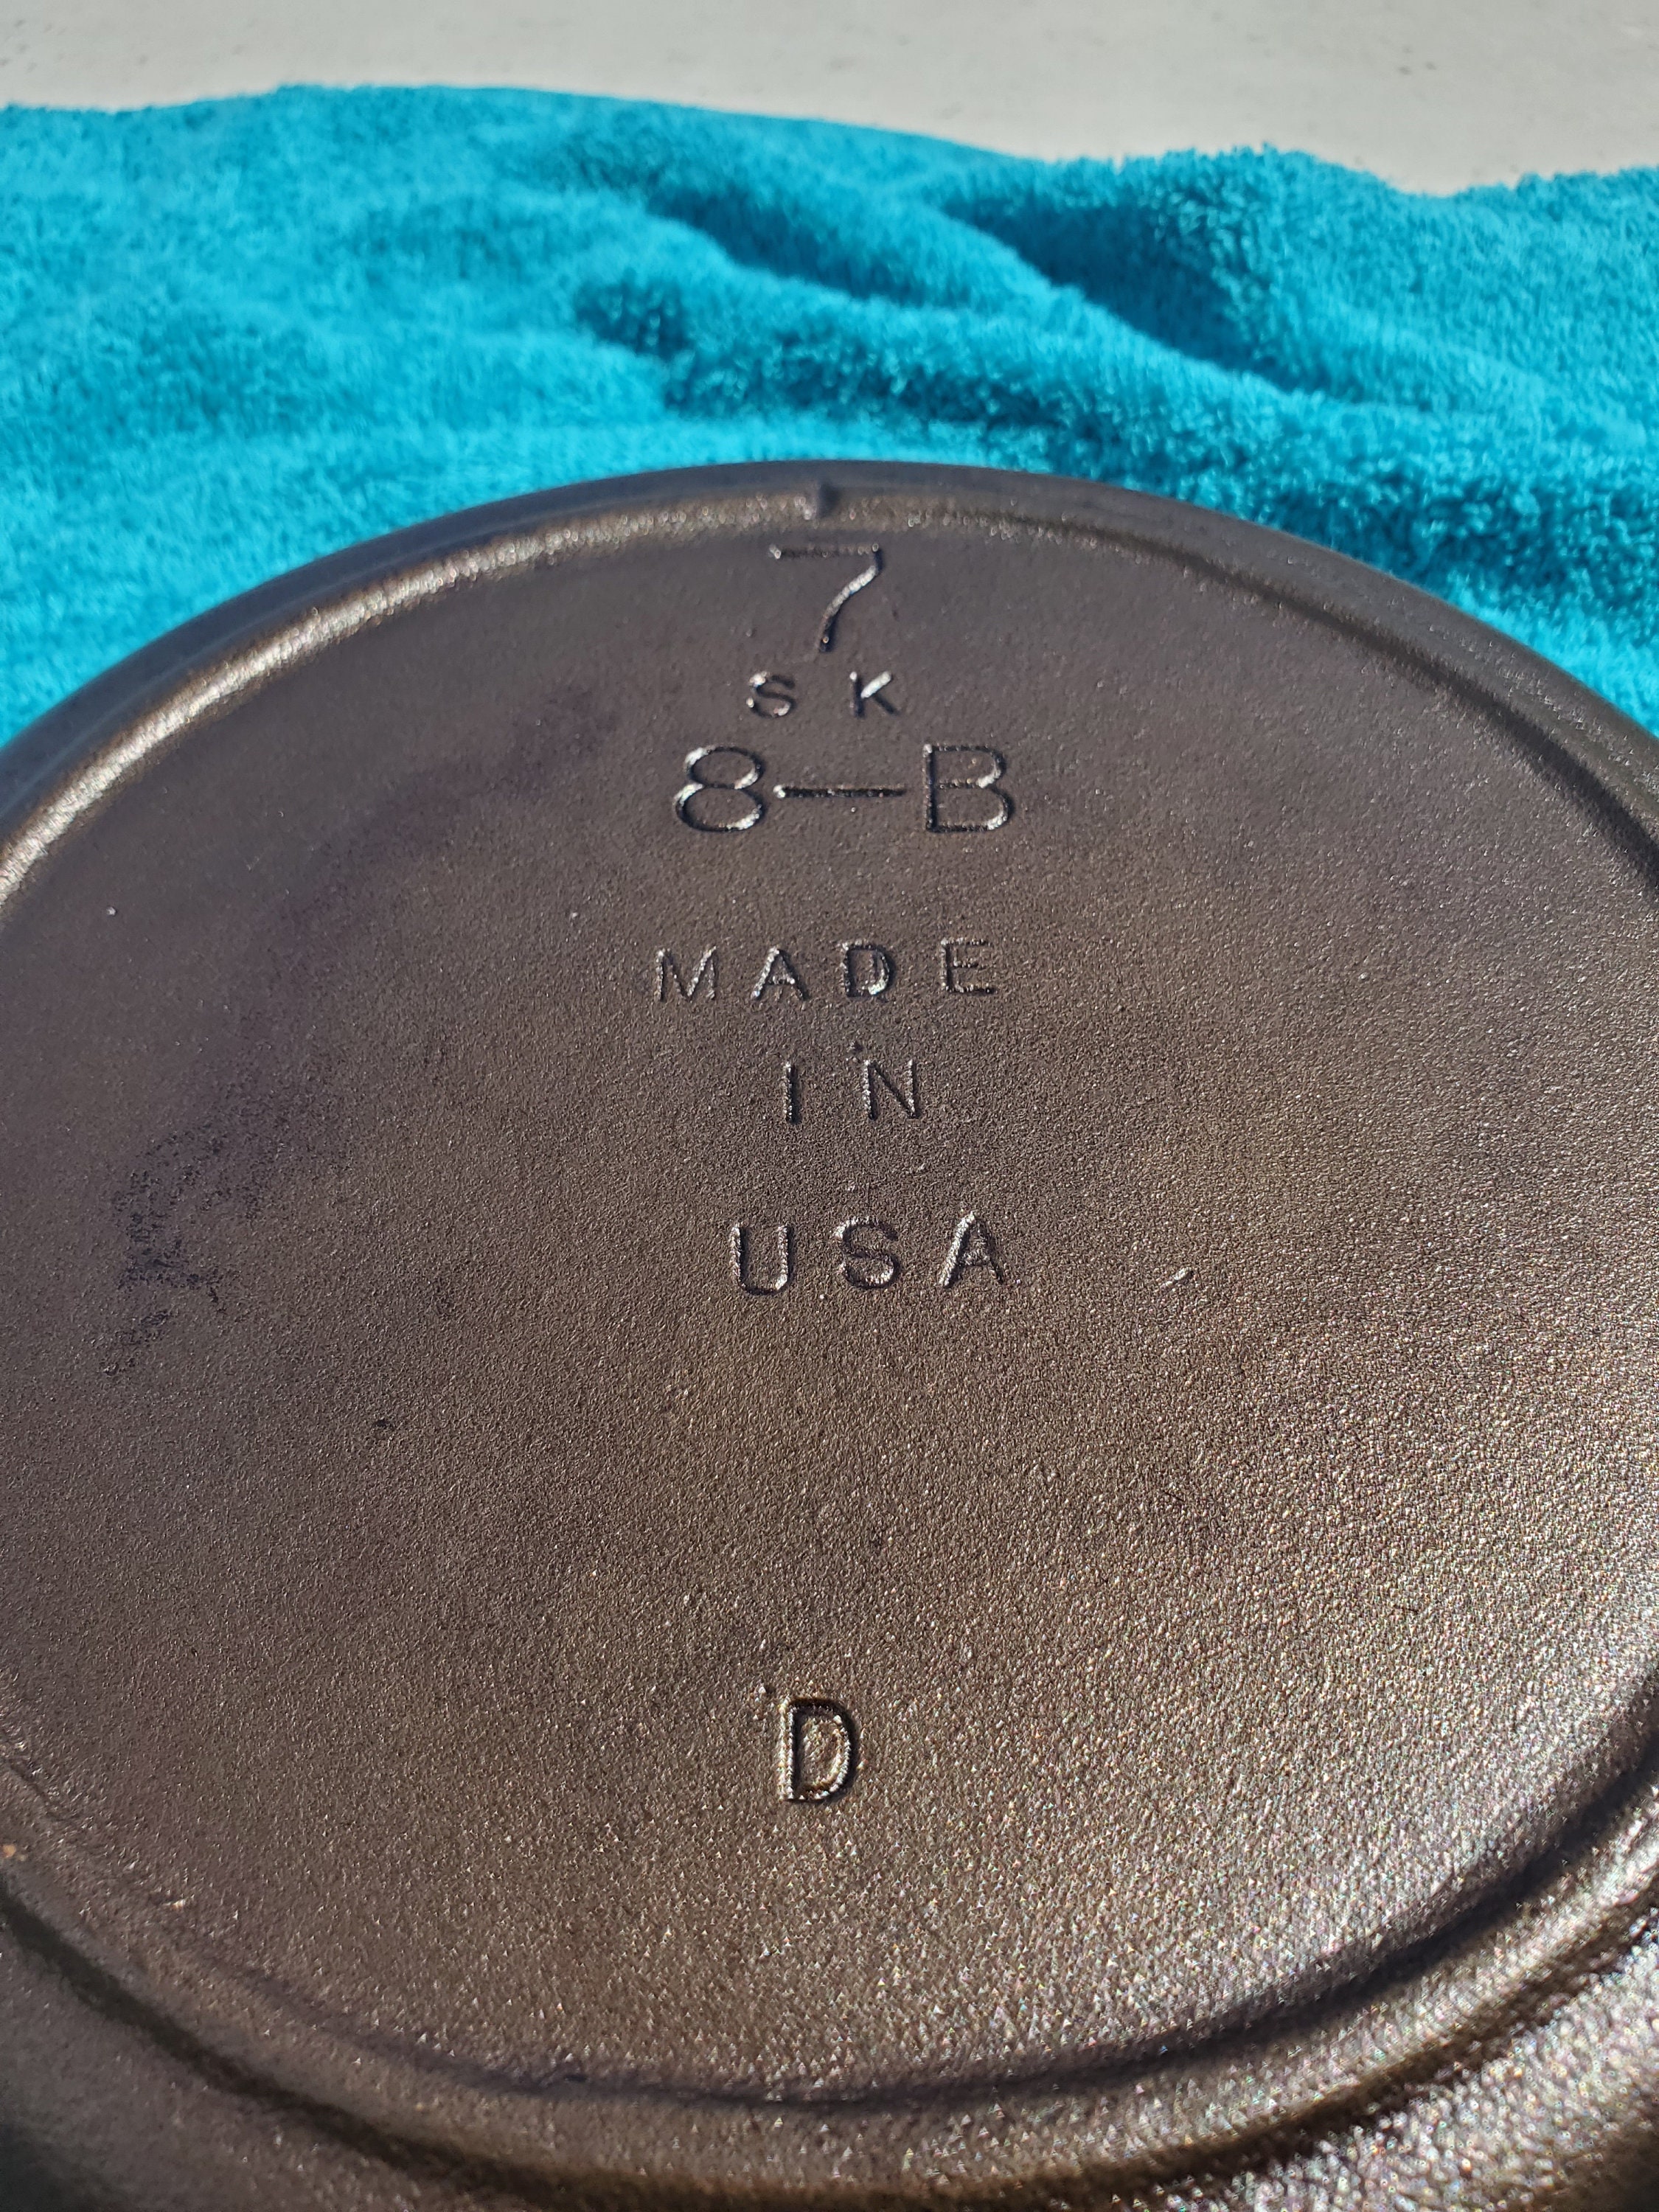 SMALL SK #3 CAST IRON SKILLET 6 1/2 INCH DIAMETER MADE IN USA - FREE  SHIPPING